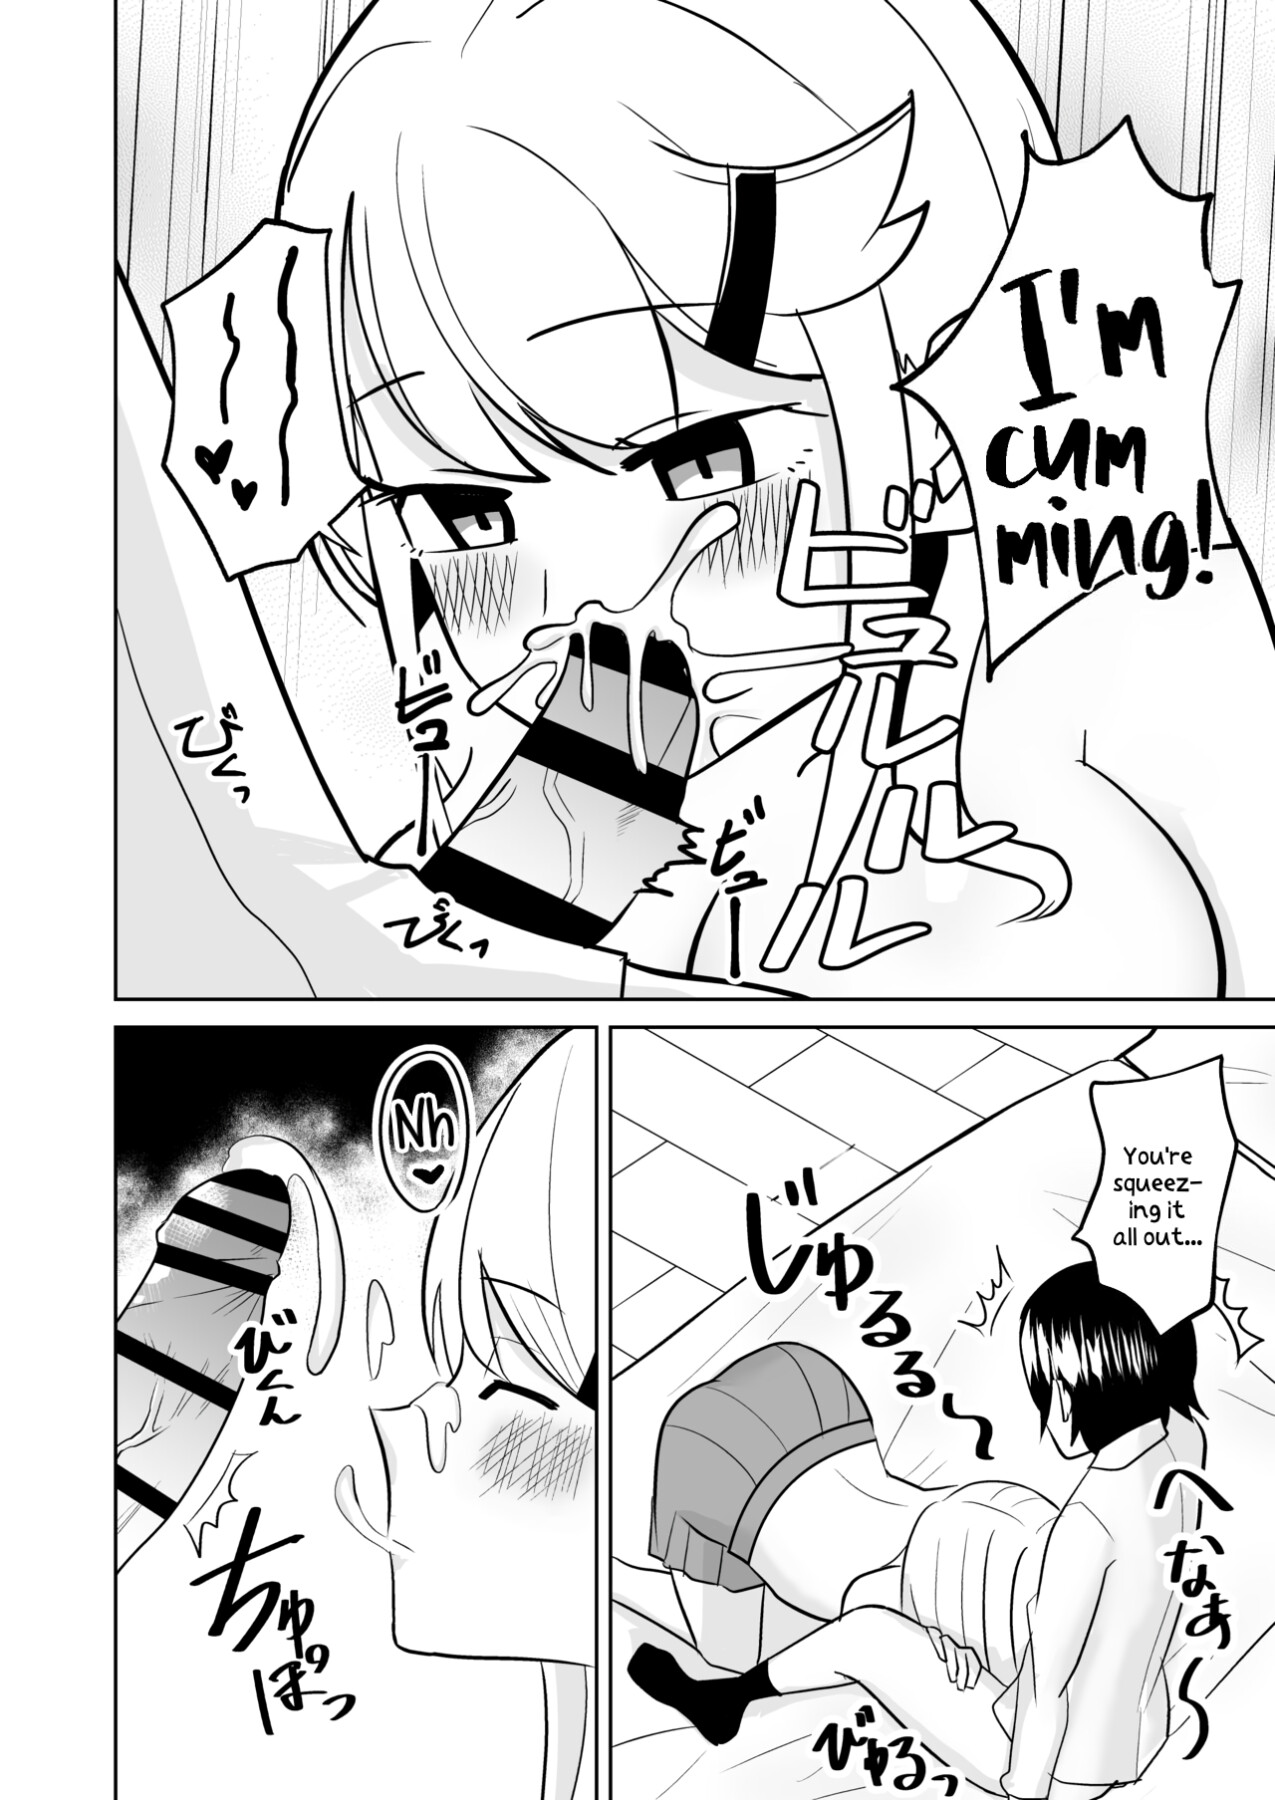 hentai manga A Story About a Gal coming To My House